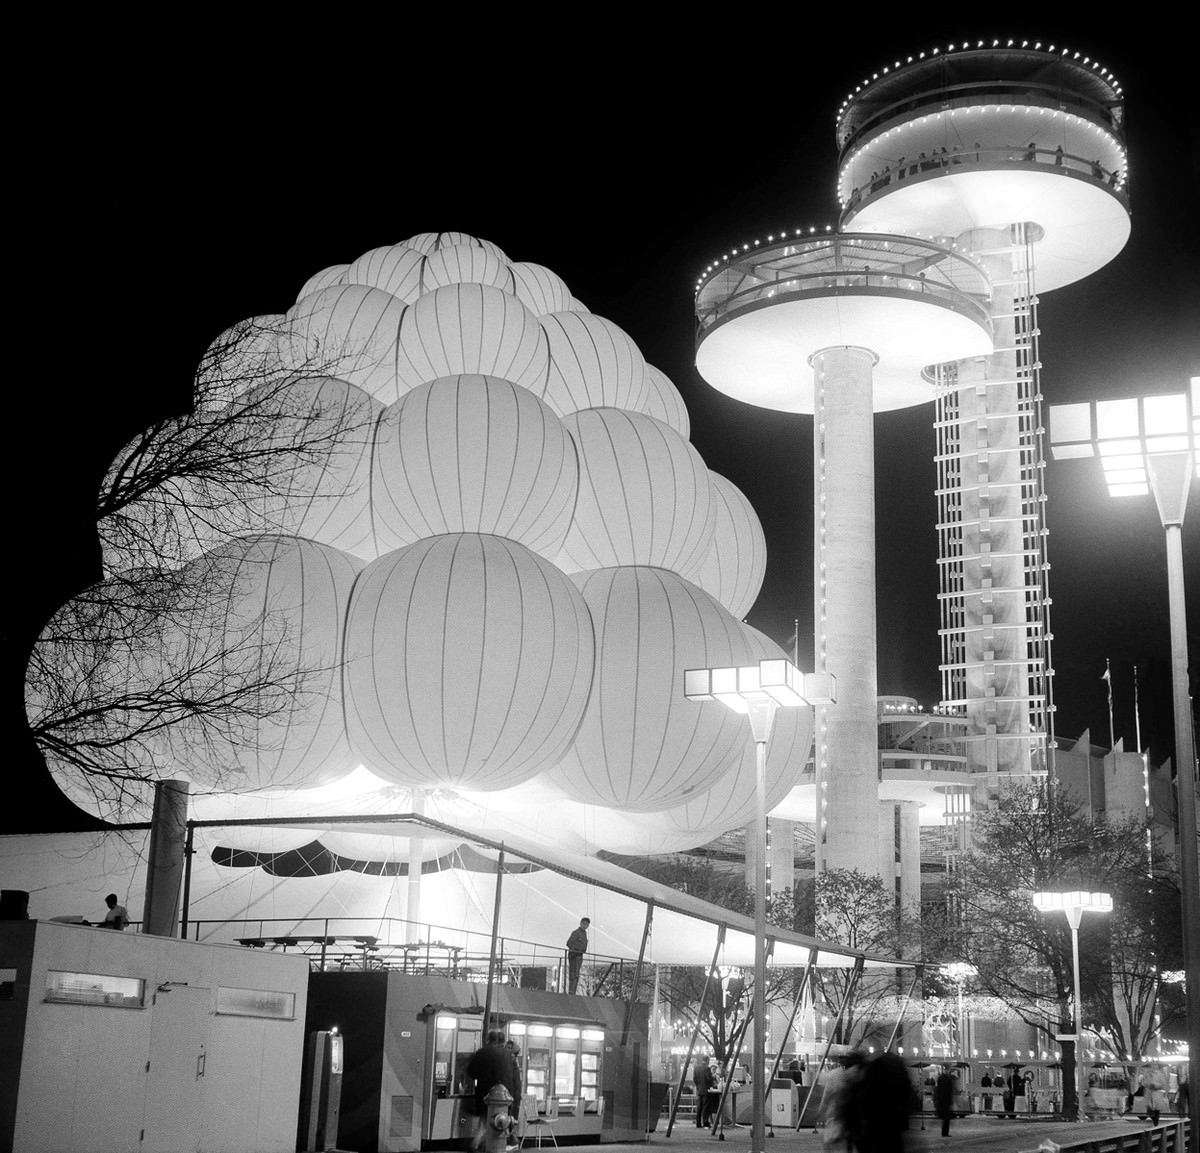 One of the Brass Rail lunch bars at the World's Fair gives the appearance of a mass of balloons tied together on August 11, 1964.